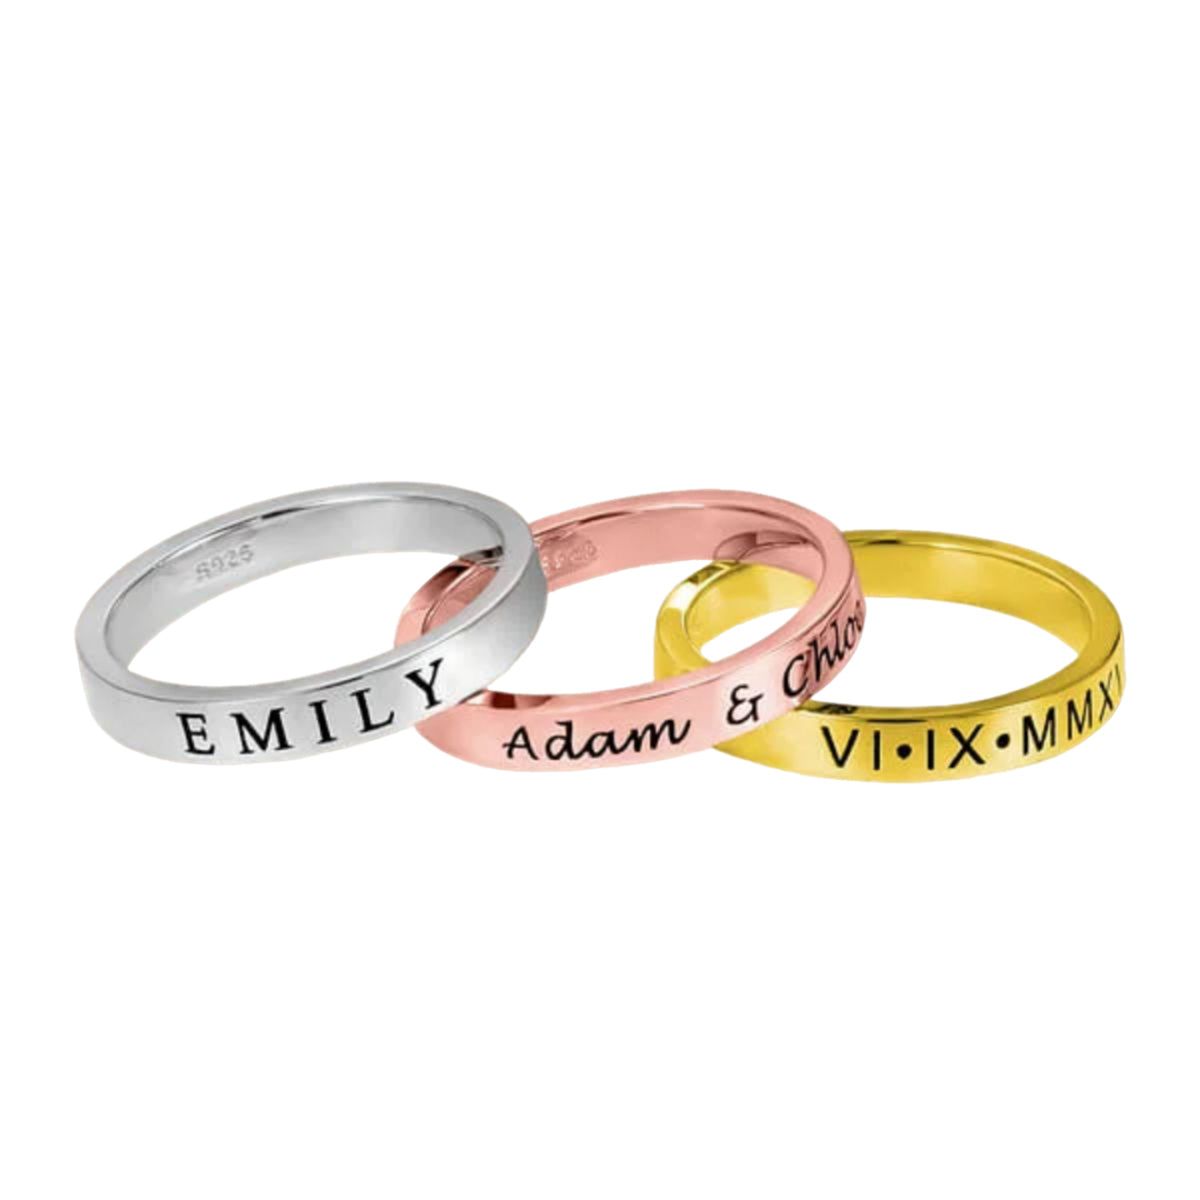 Personalized Engraving Stackable Name Rings